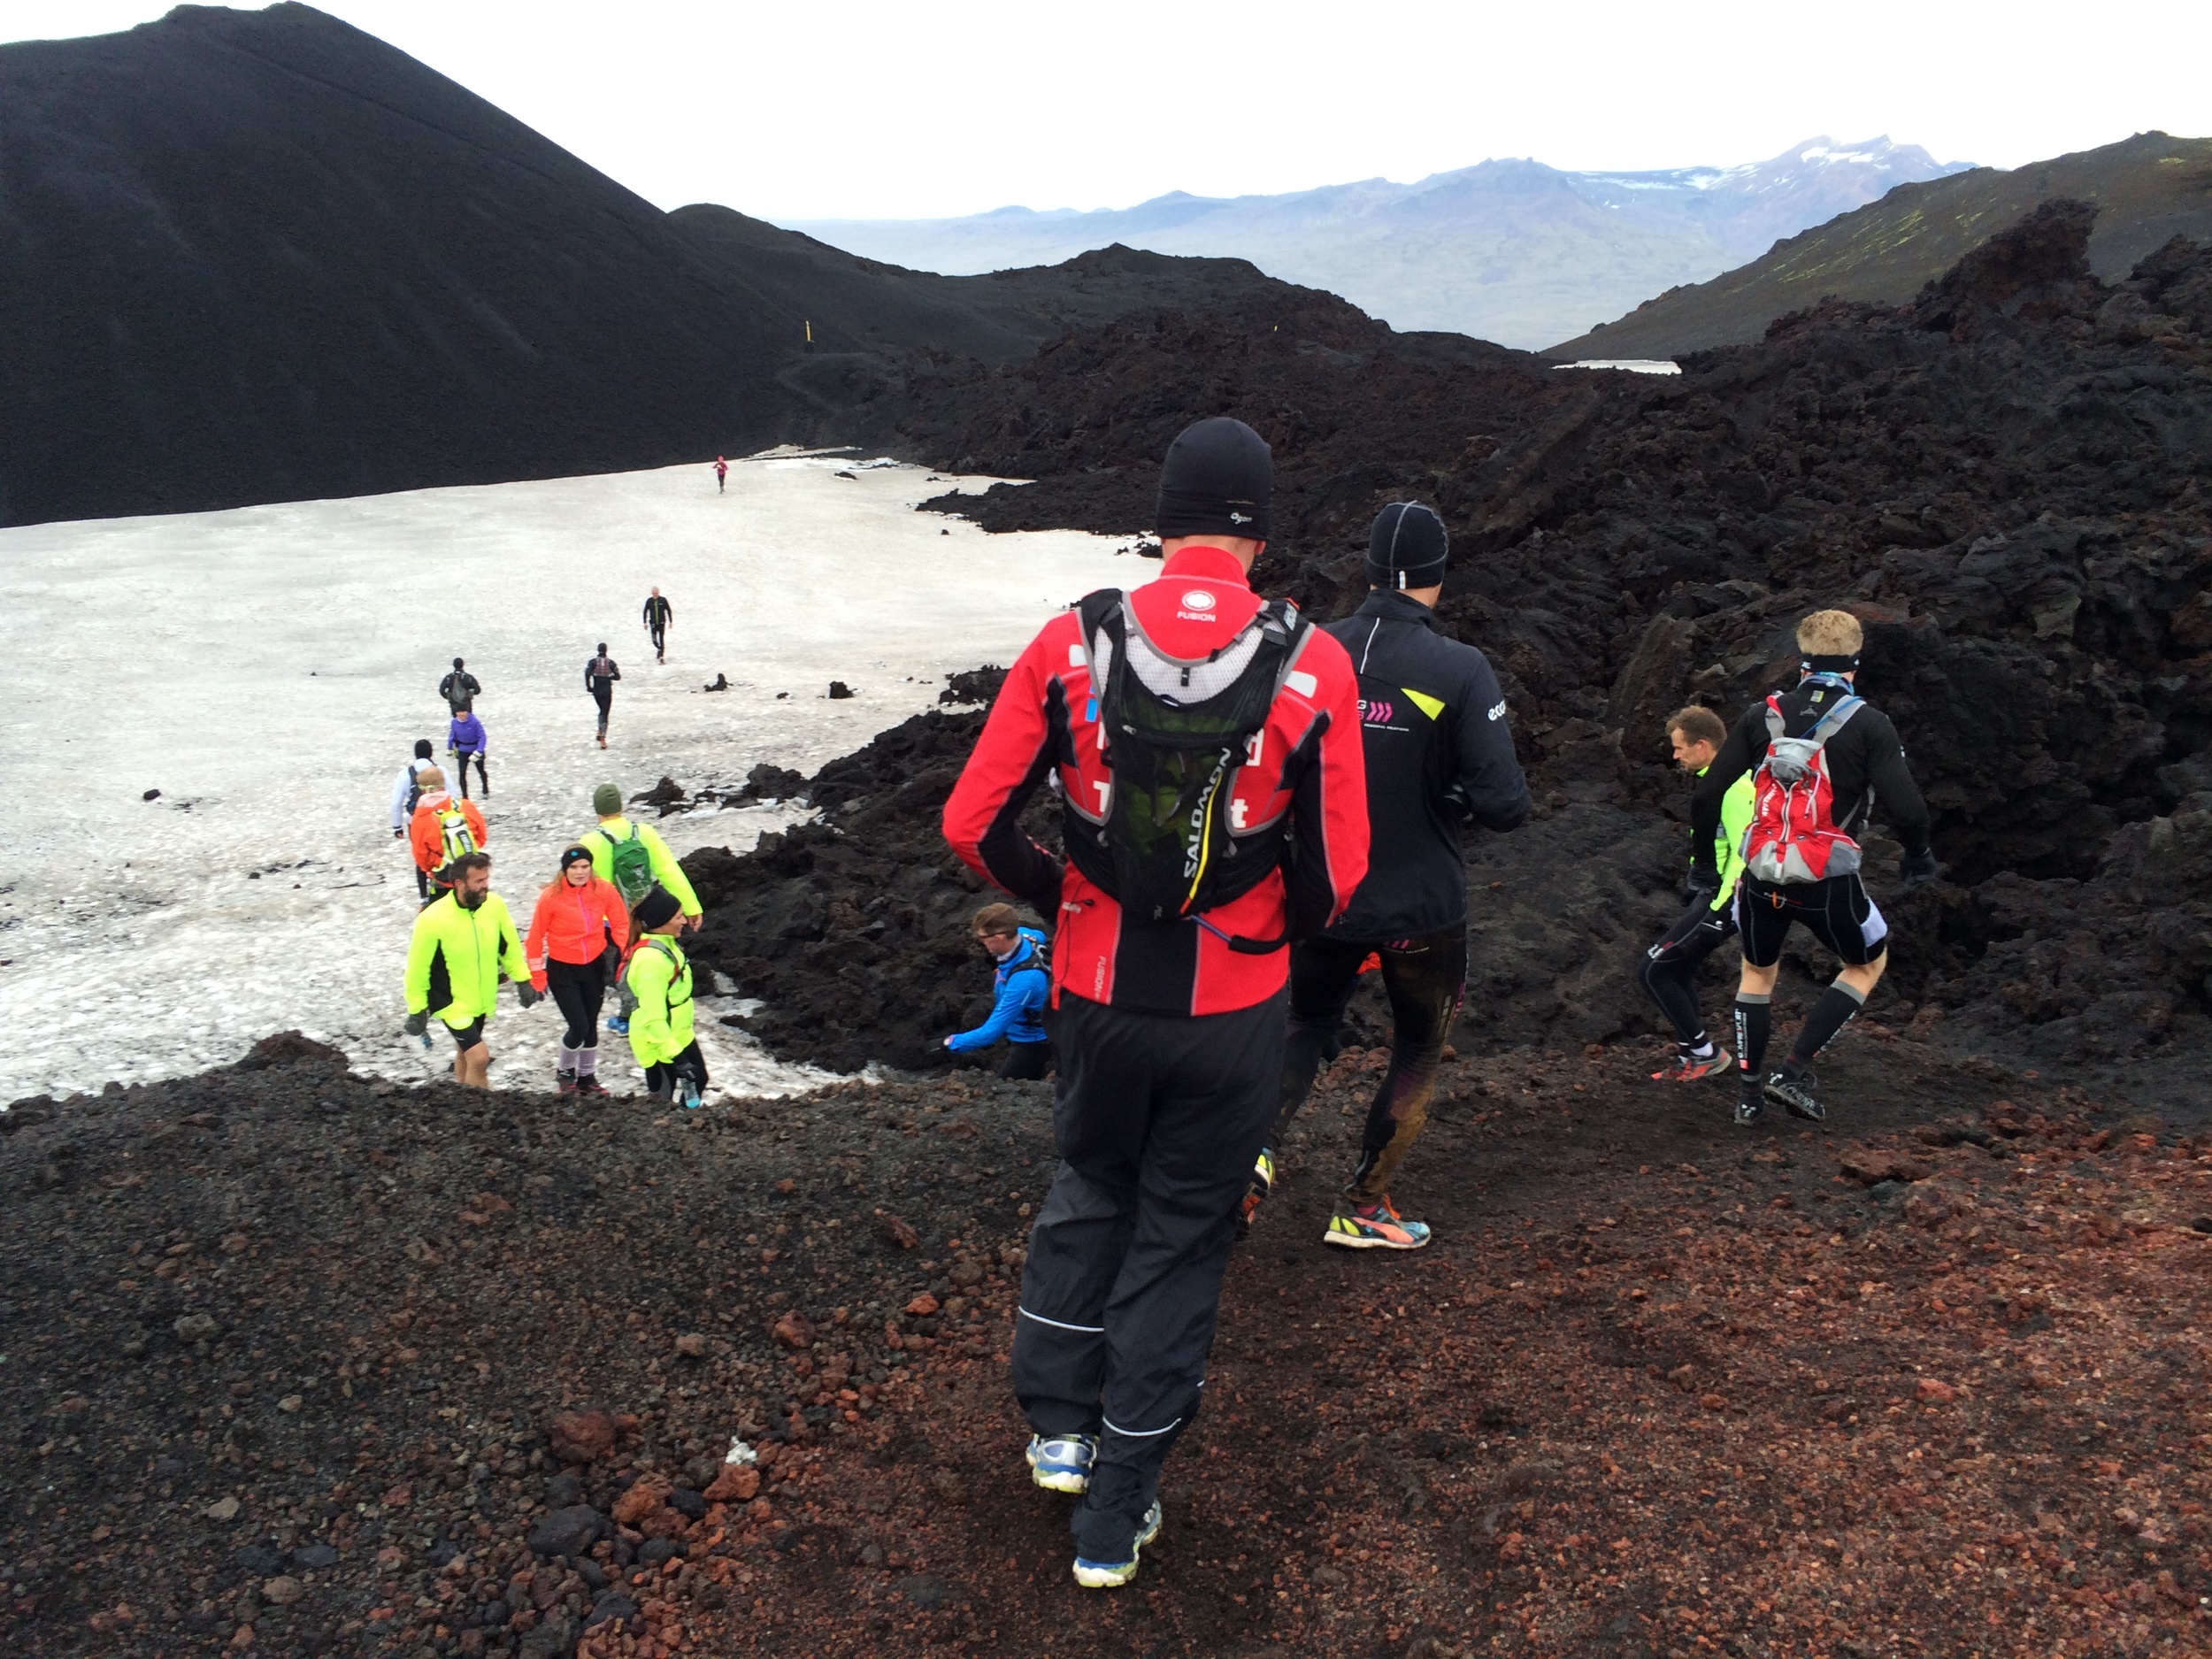 Running on lava and snow